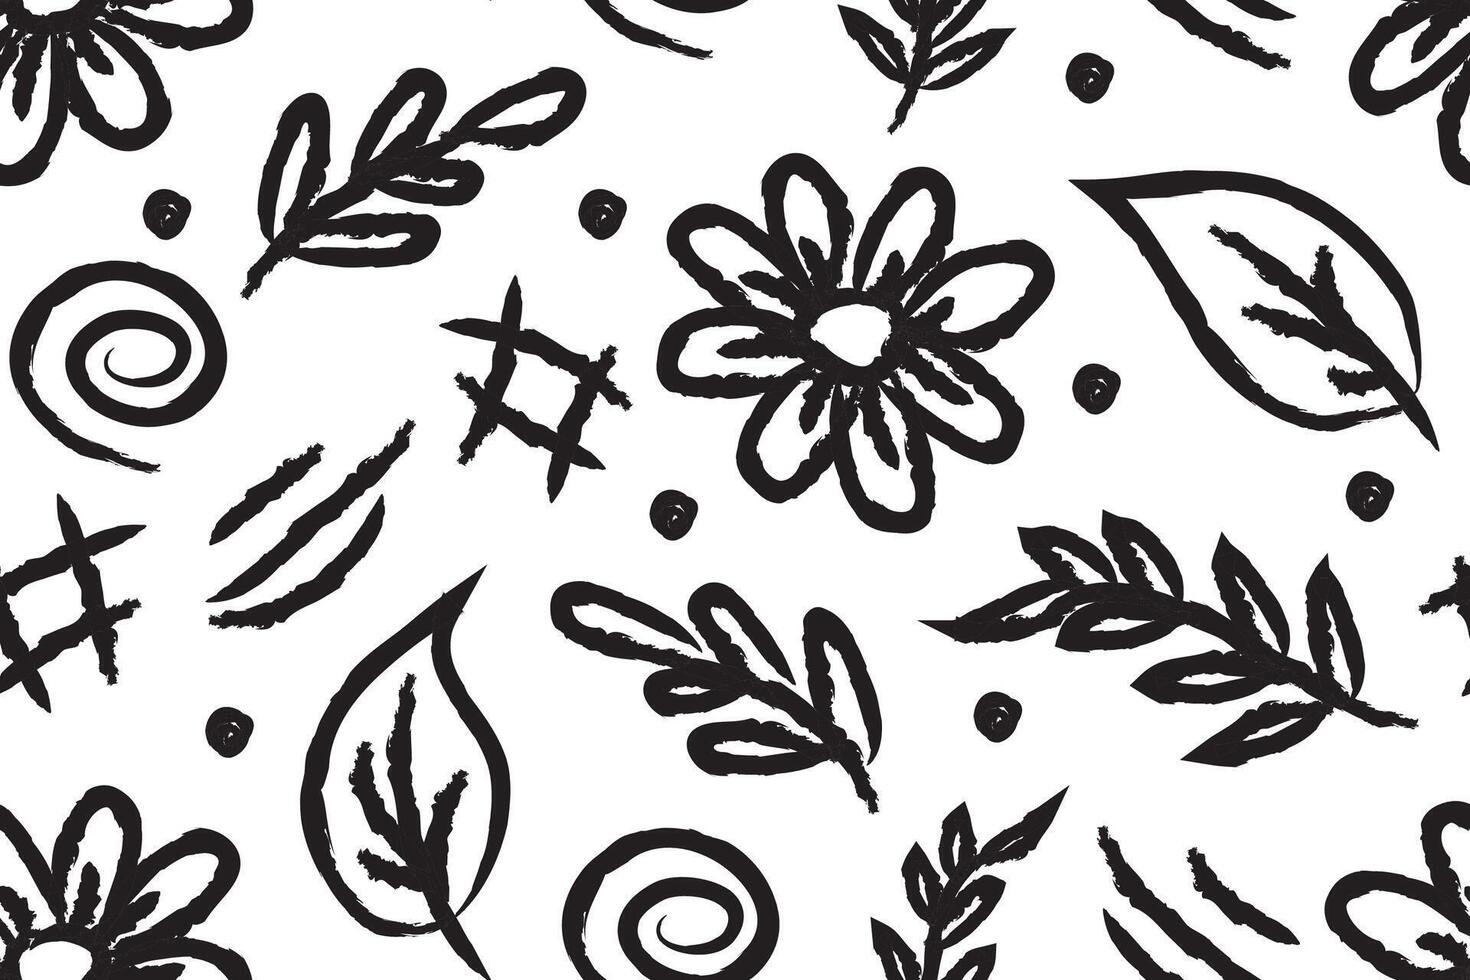 Seamless childish pattern with fairy flowers. Hand drawn black charcoal flowers with leaves. Ink drawing wild plants, herbs. Botanical ornament with branches. Dry brush style floral motives. vector